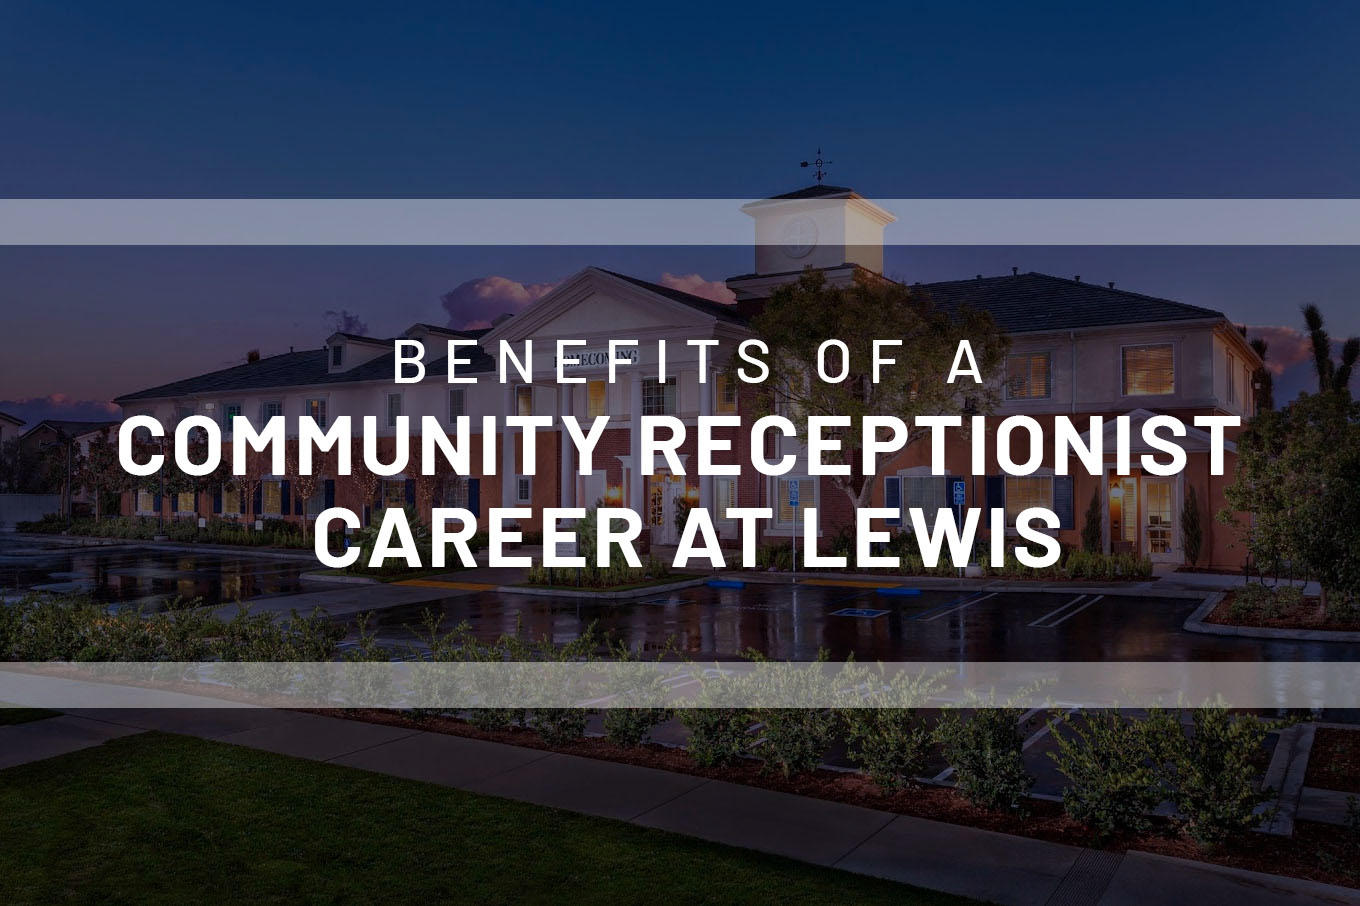 Benefits of a Community Receptionist Career at Lewis